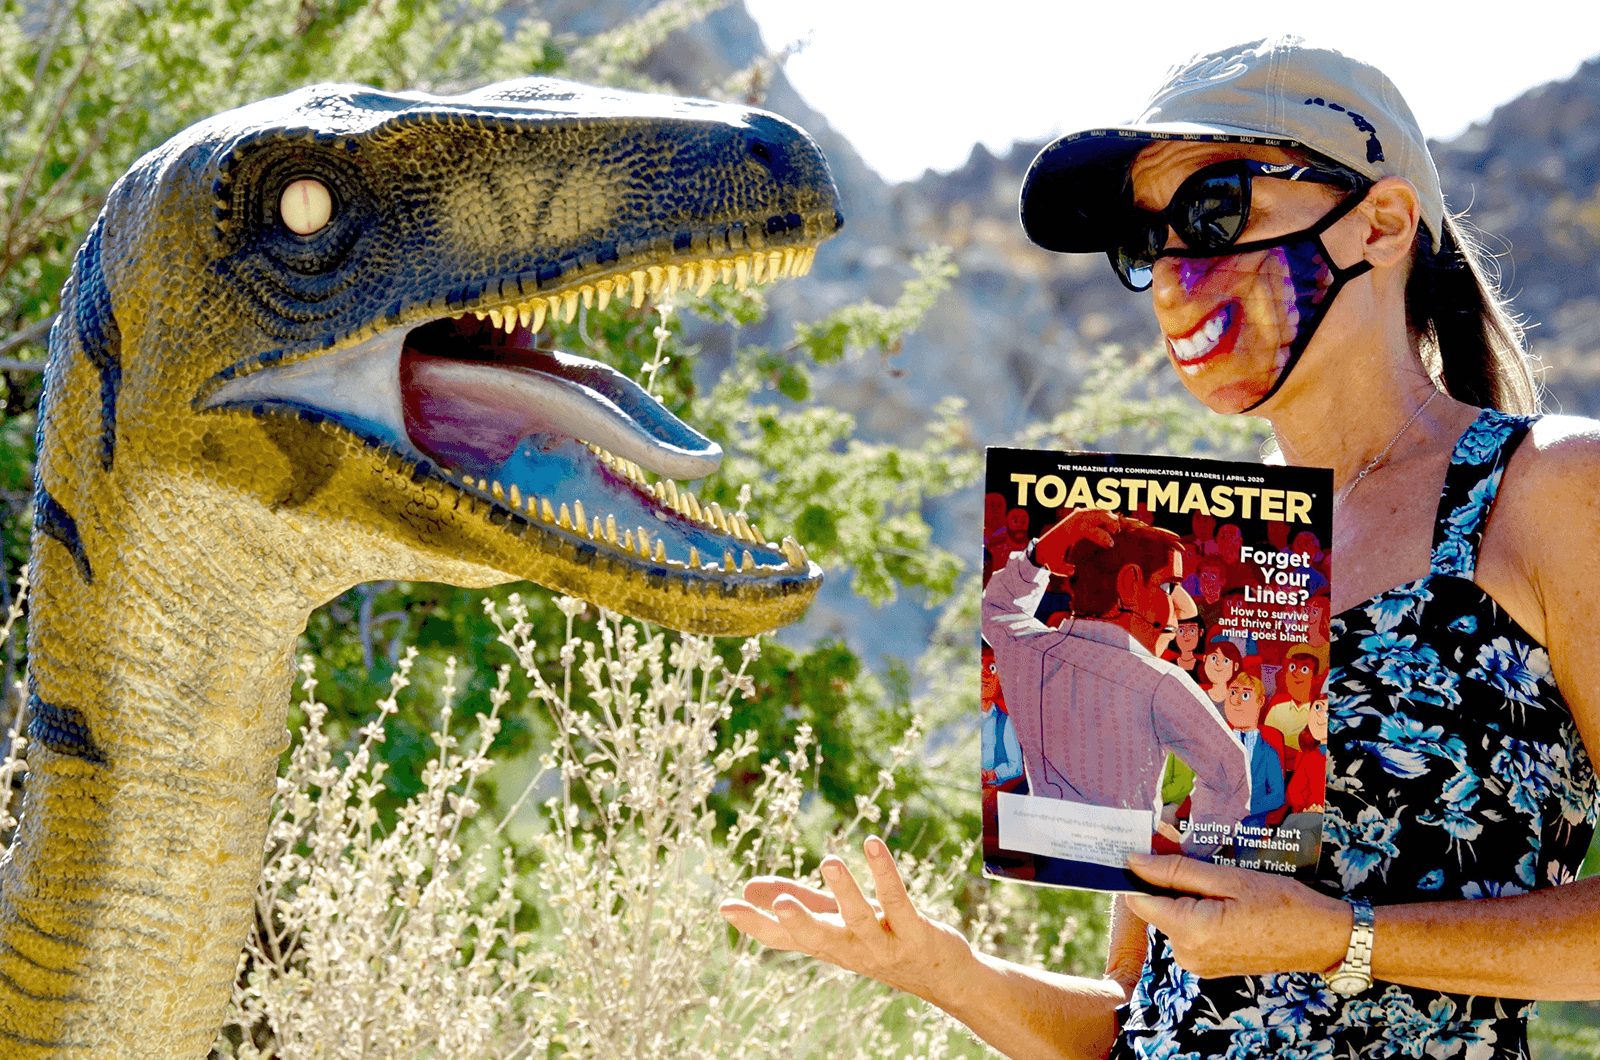 Deborah McAdams of Palm Springs, California, explains the benefits of Toastmasters to a new friend at the Living Desert in Palm Desert, California.